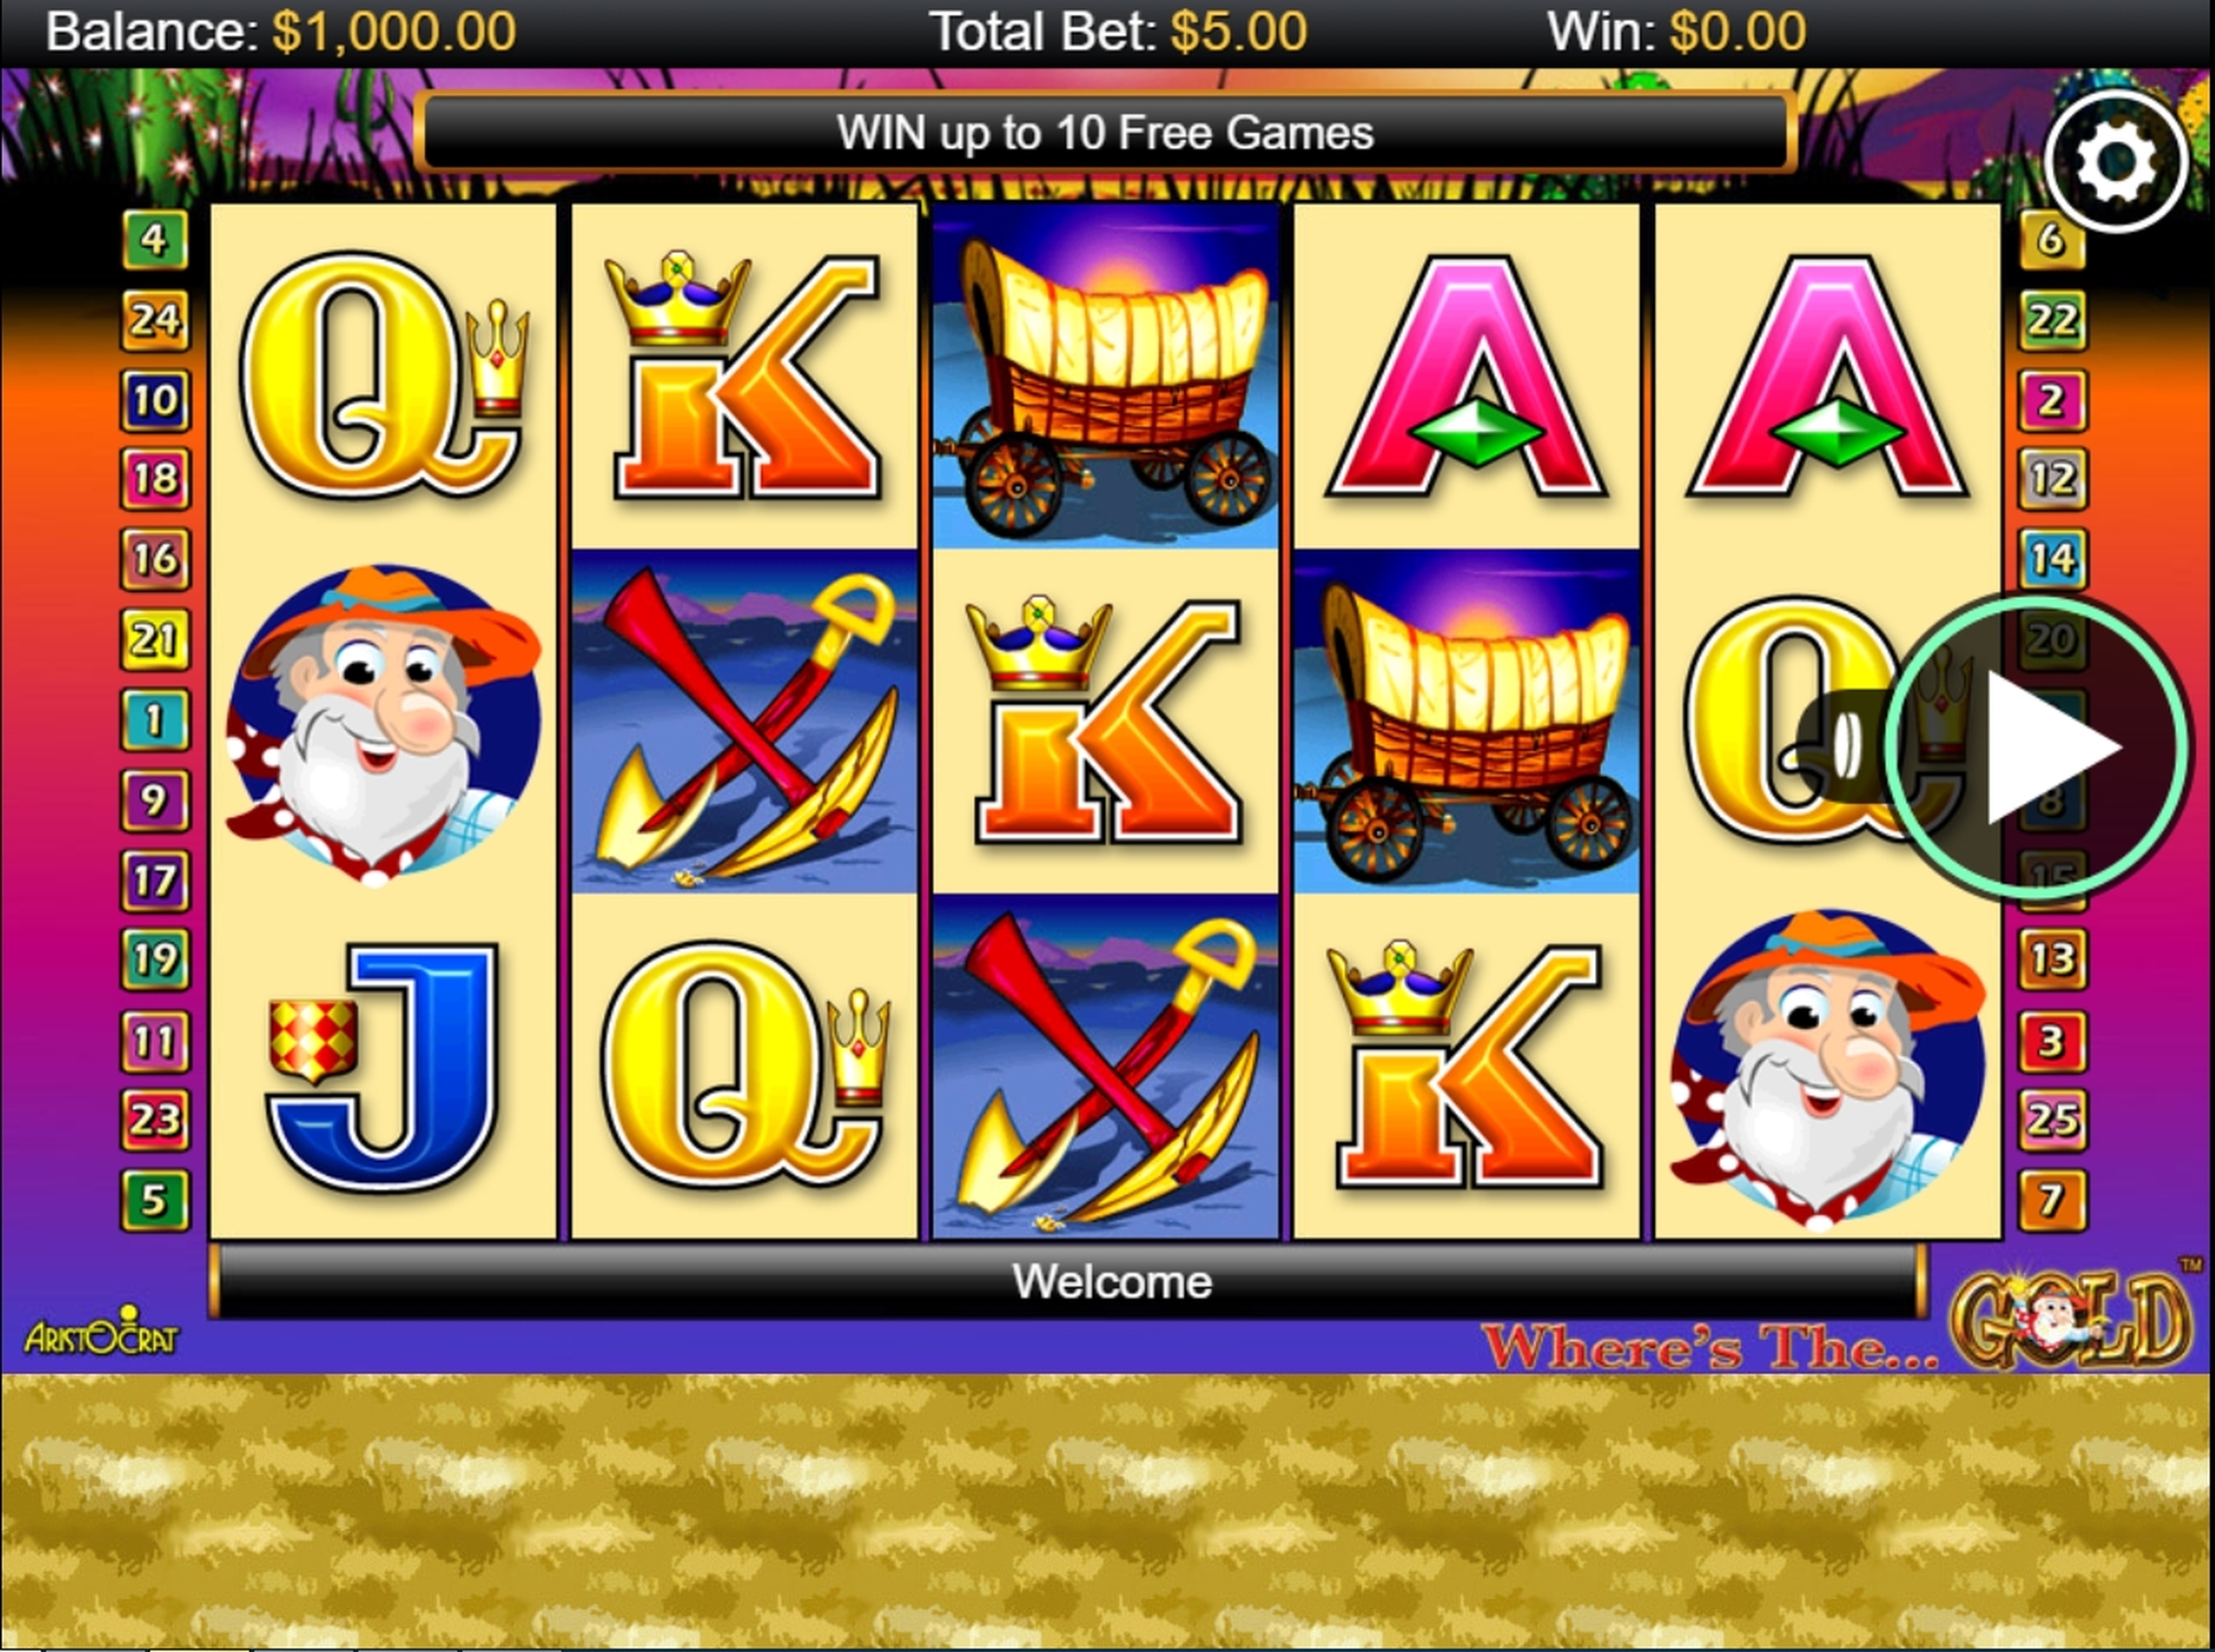 Reels in Where's The Gold Slot Game by Aristocrat